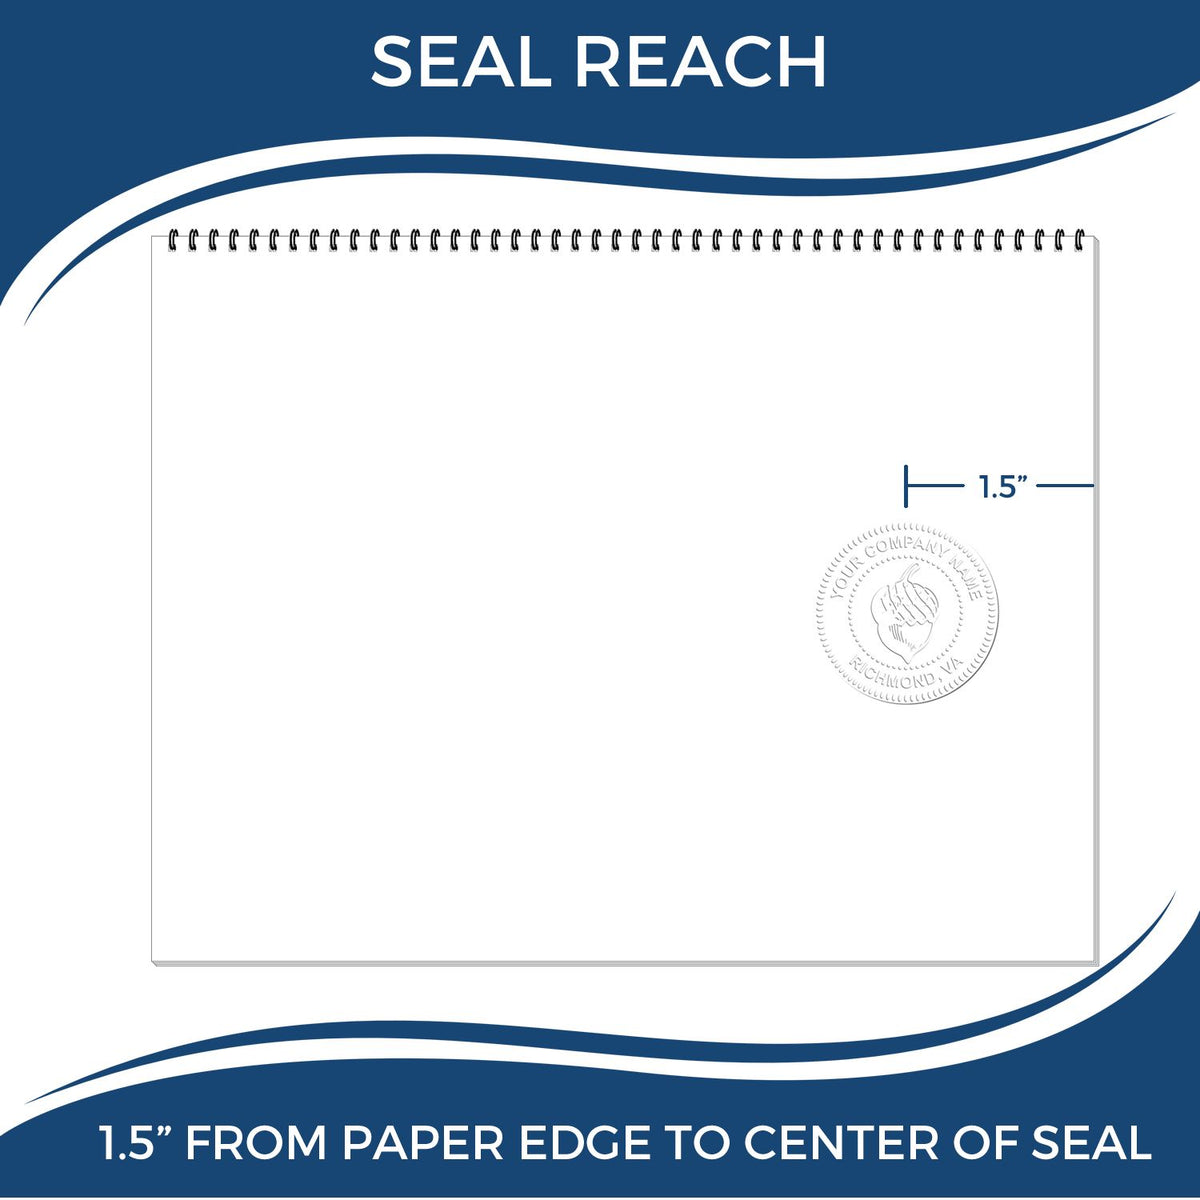 An infographic showing the seal reach which is represented by a ruler and a miniature seal image of the Gift Hawaii Land Surveyor Seal